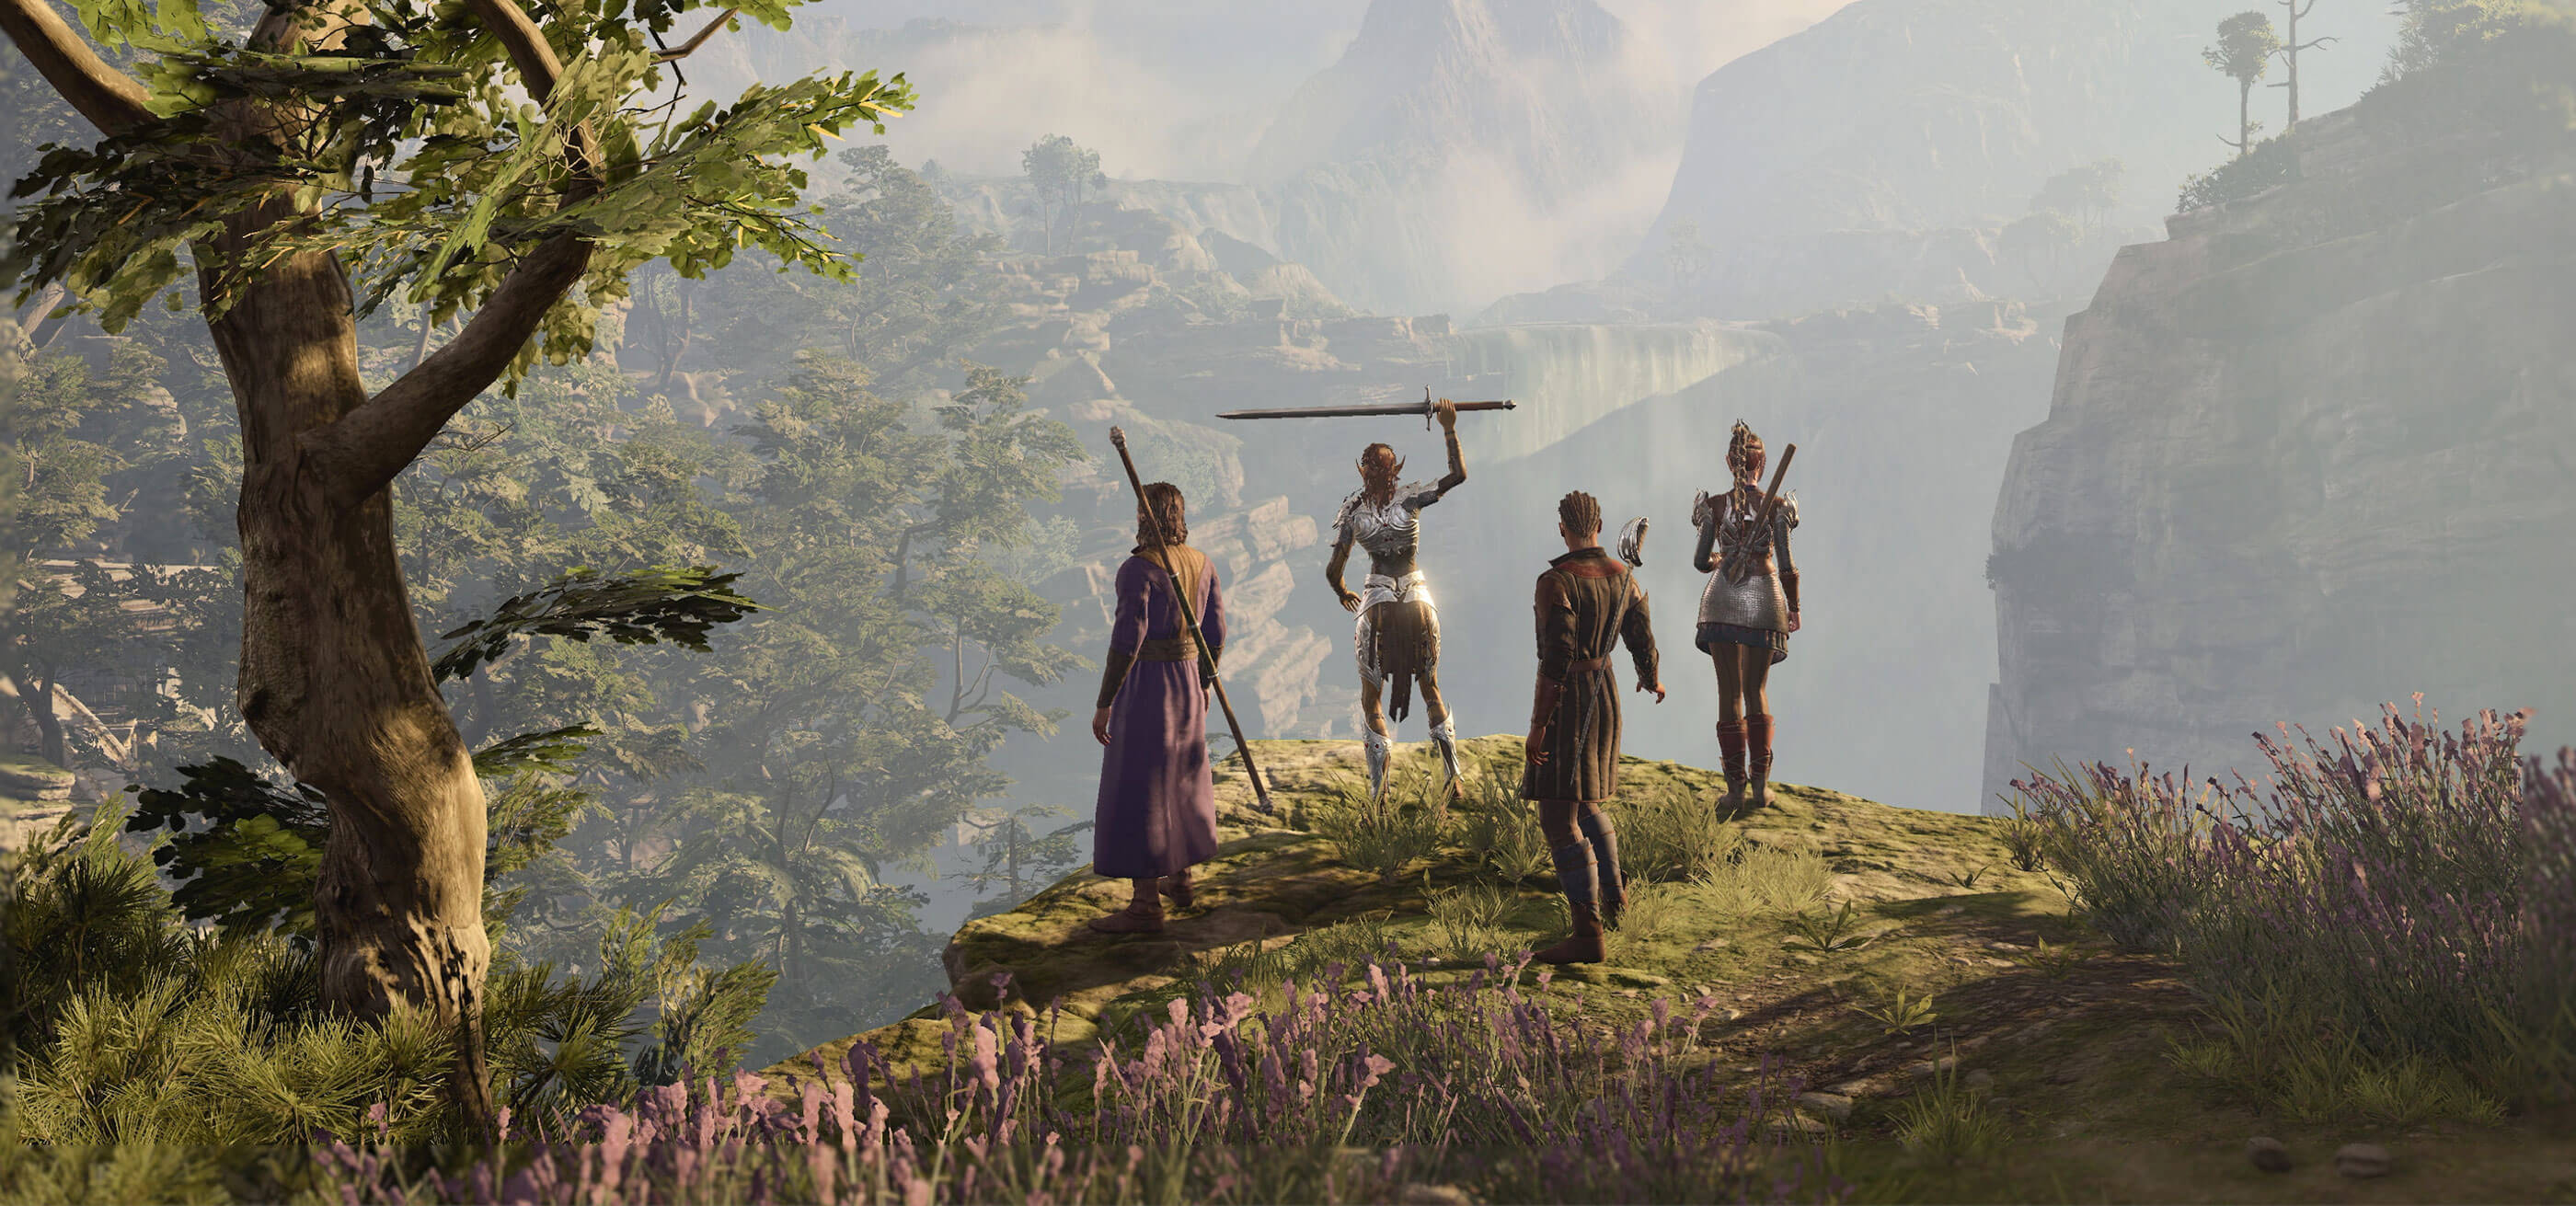 Baldur’s Gate 3 screenshot of a four-character party standing at the edge of a scenic ravine.